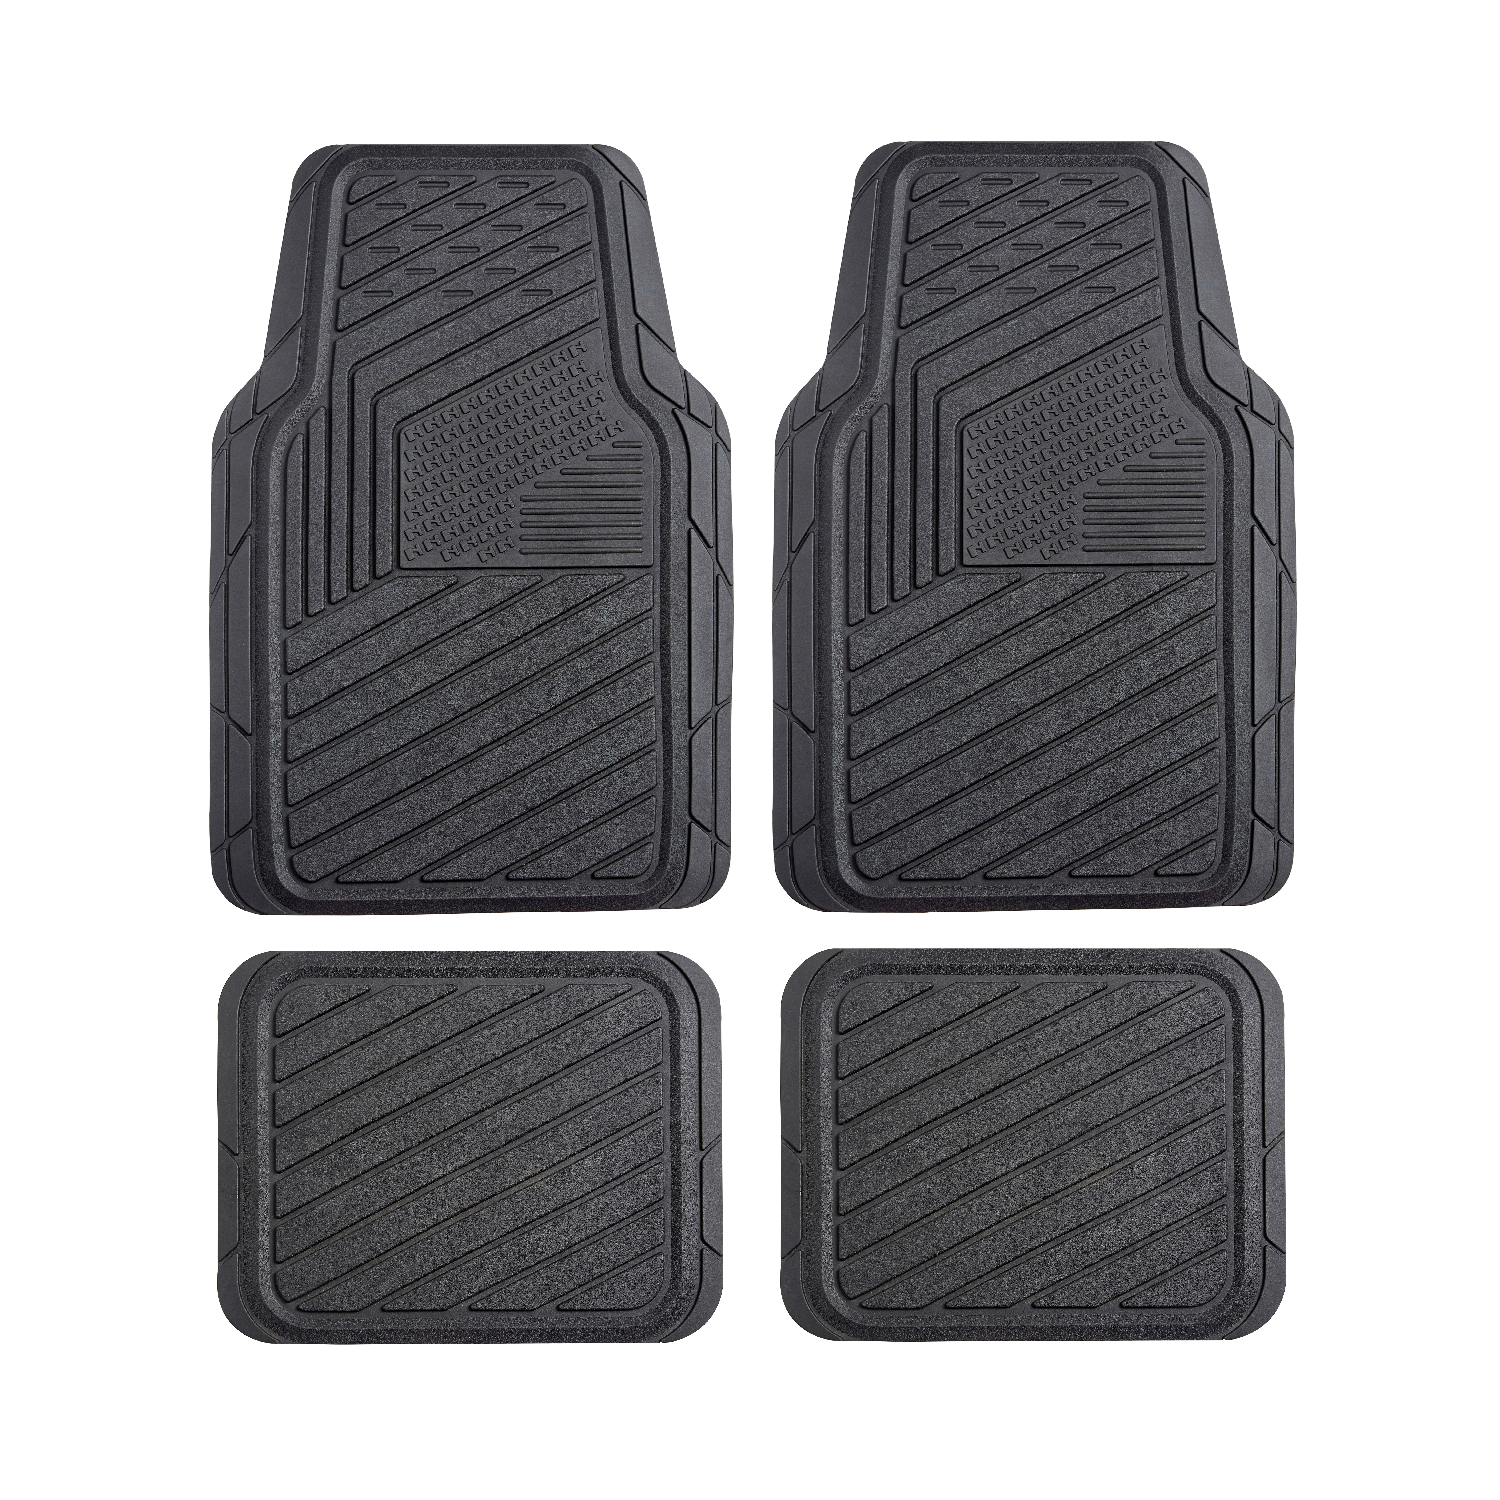 4-Piece Black Rubber All-weather Trim-to-Fit Floor Mats 1534